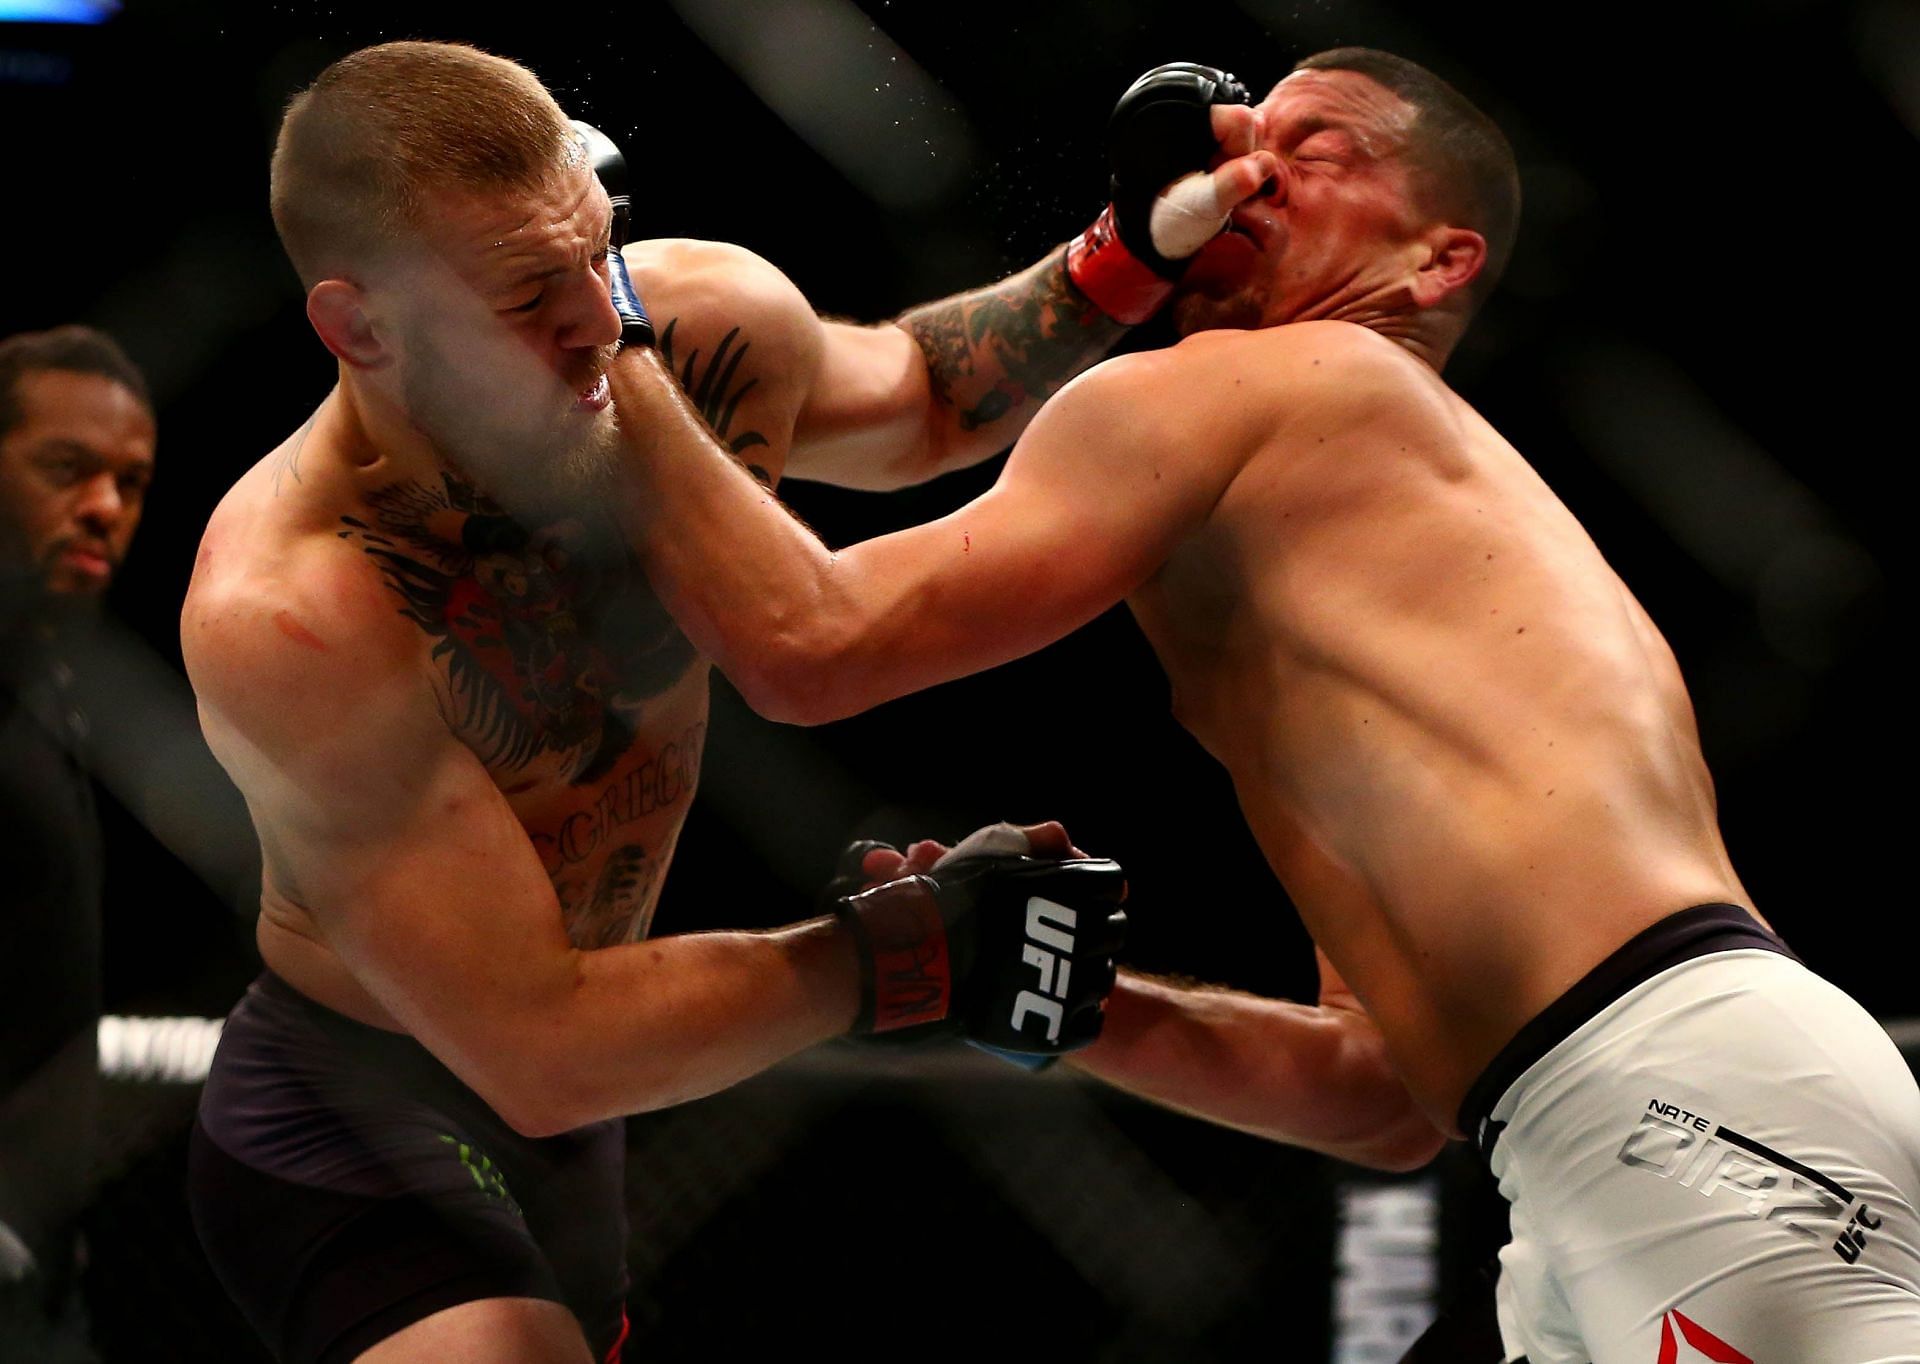 Conor McGregor has never backed down from a fight in the UFC and beyond